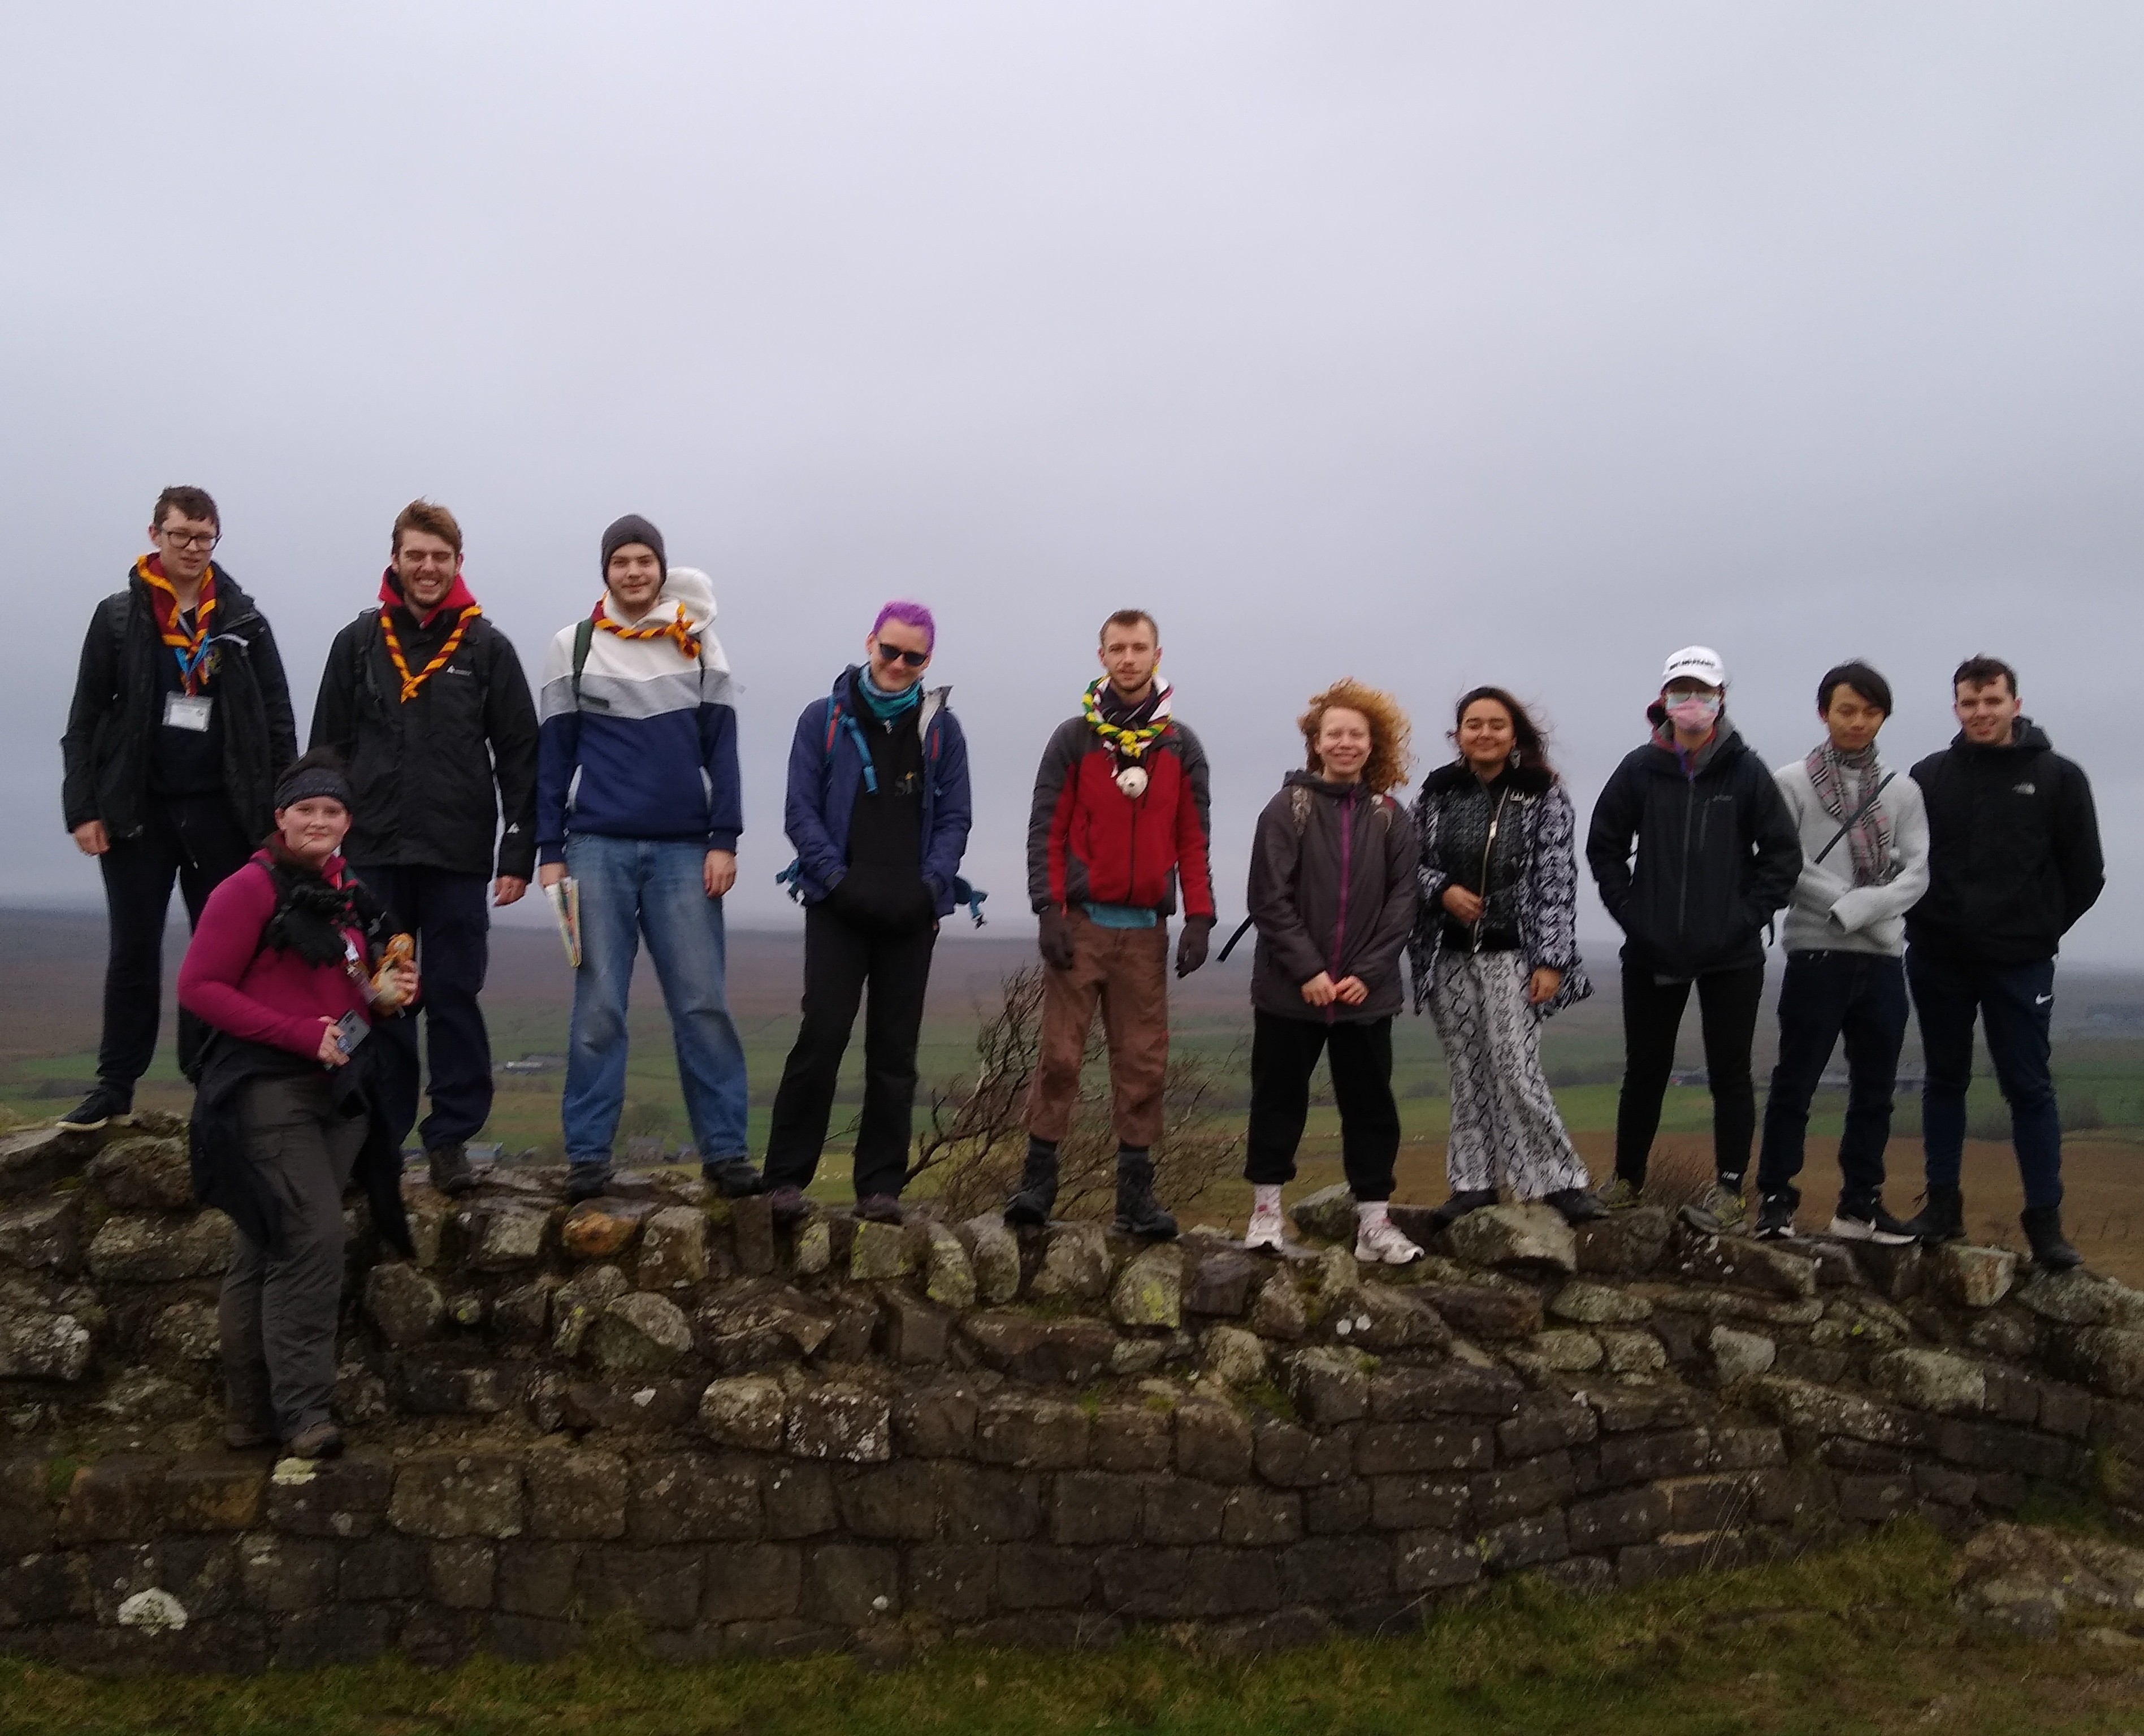 Group photo of those on the Easy Hike activity, standing atop Hadrian's Wall